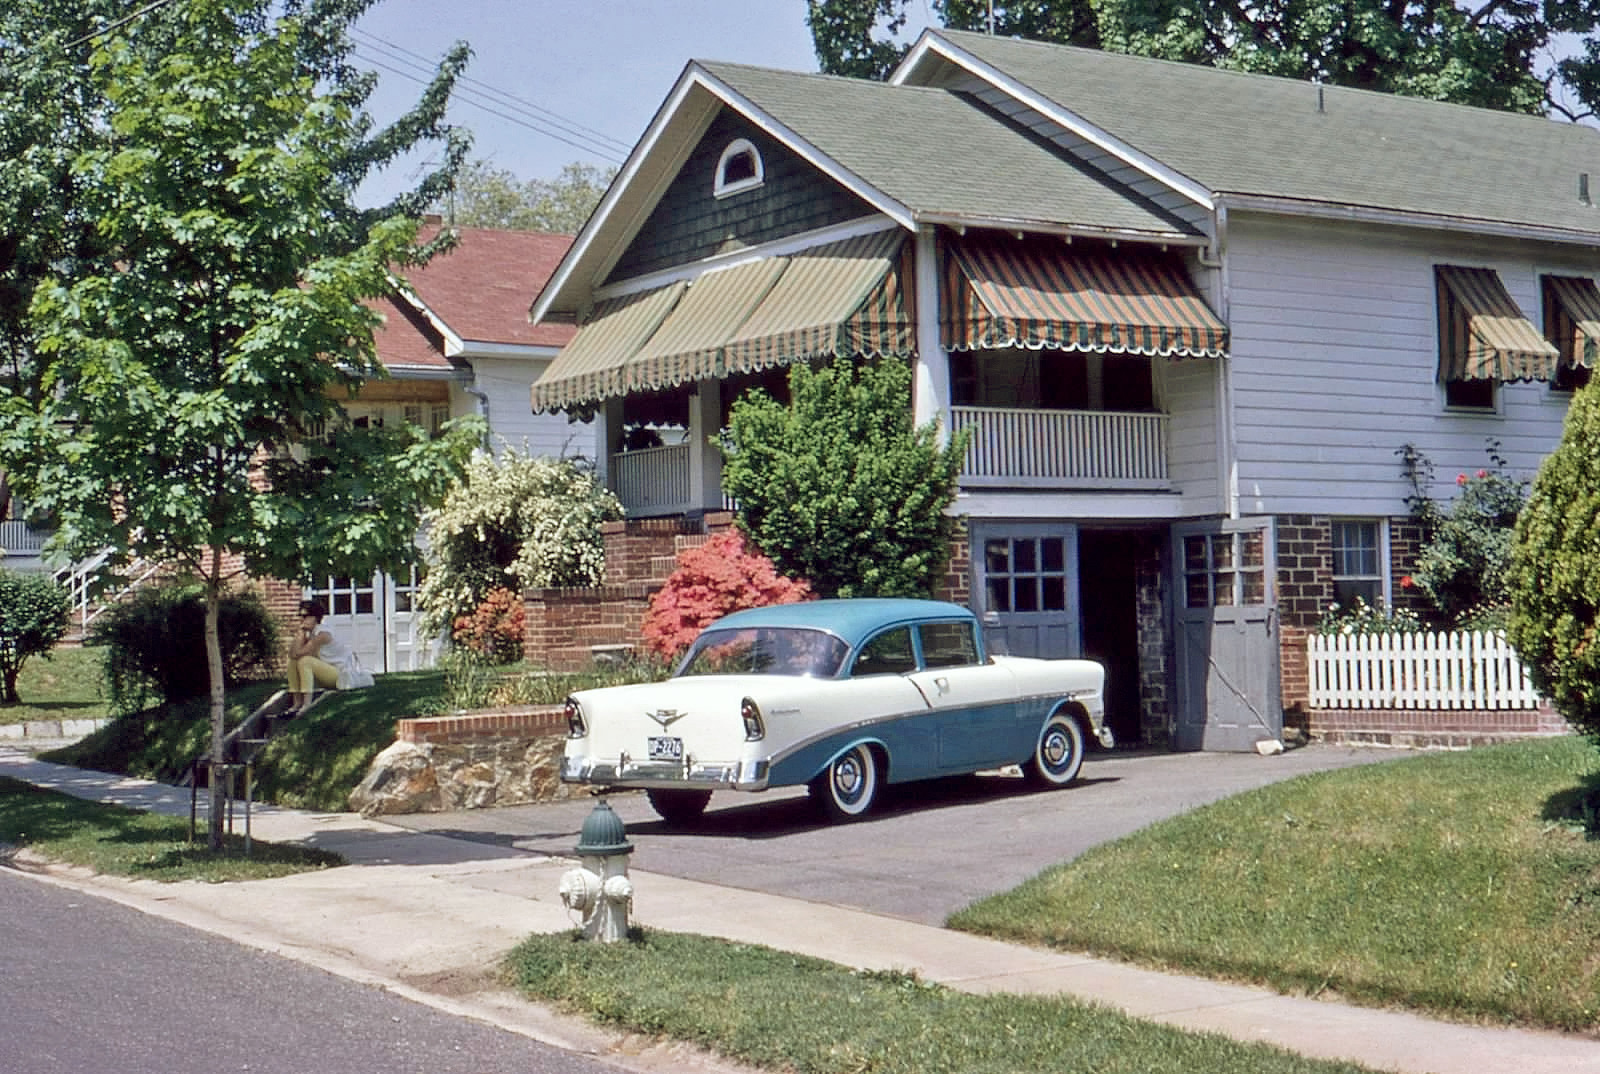 My dad was born in Maryland and lived there until he was 12. In 1964 he and my mother  visited old family friends the Winklers in Silver Spring. This is their house where they stayed, my mother Janice sitting on the front steps. She was pregnant with my sister at the time. View full size.